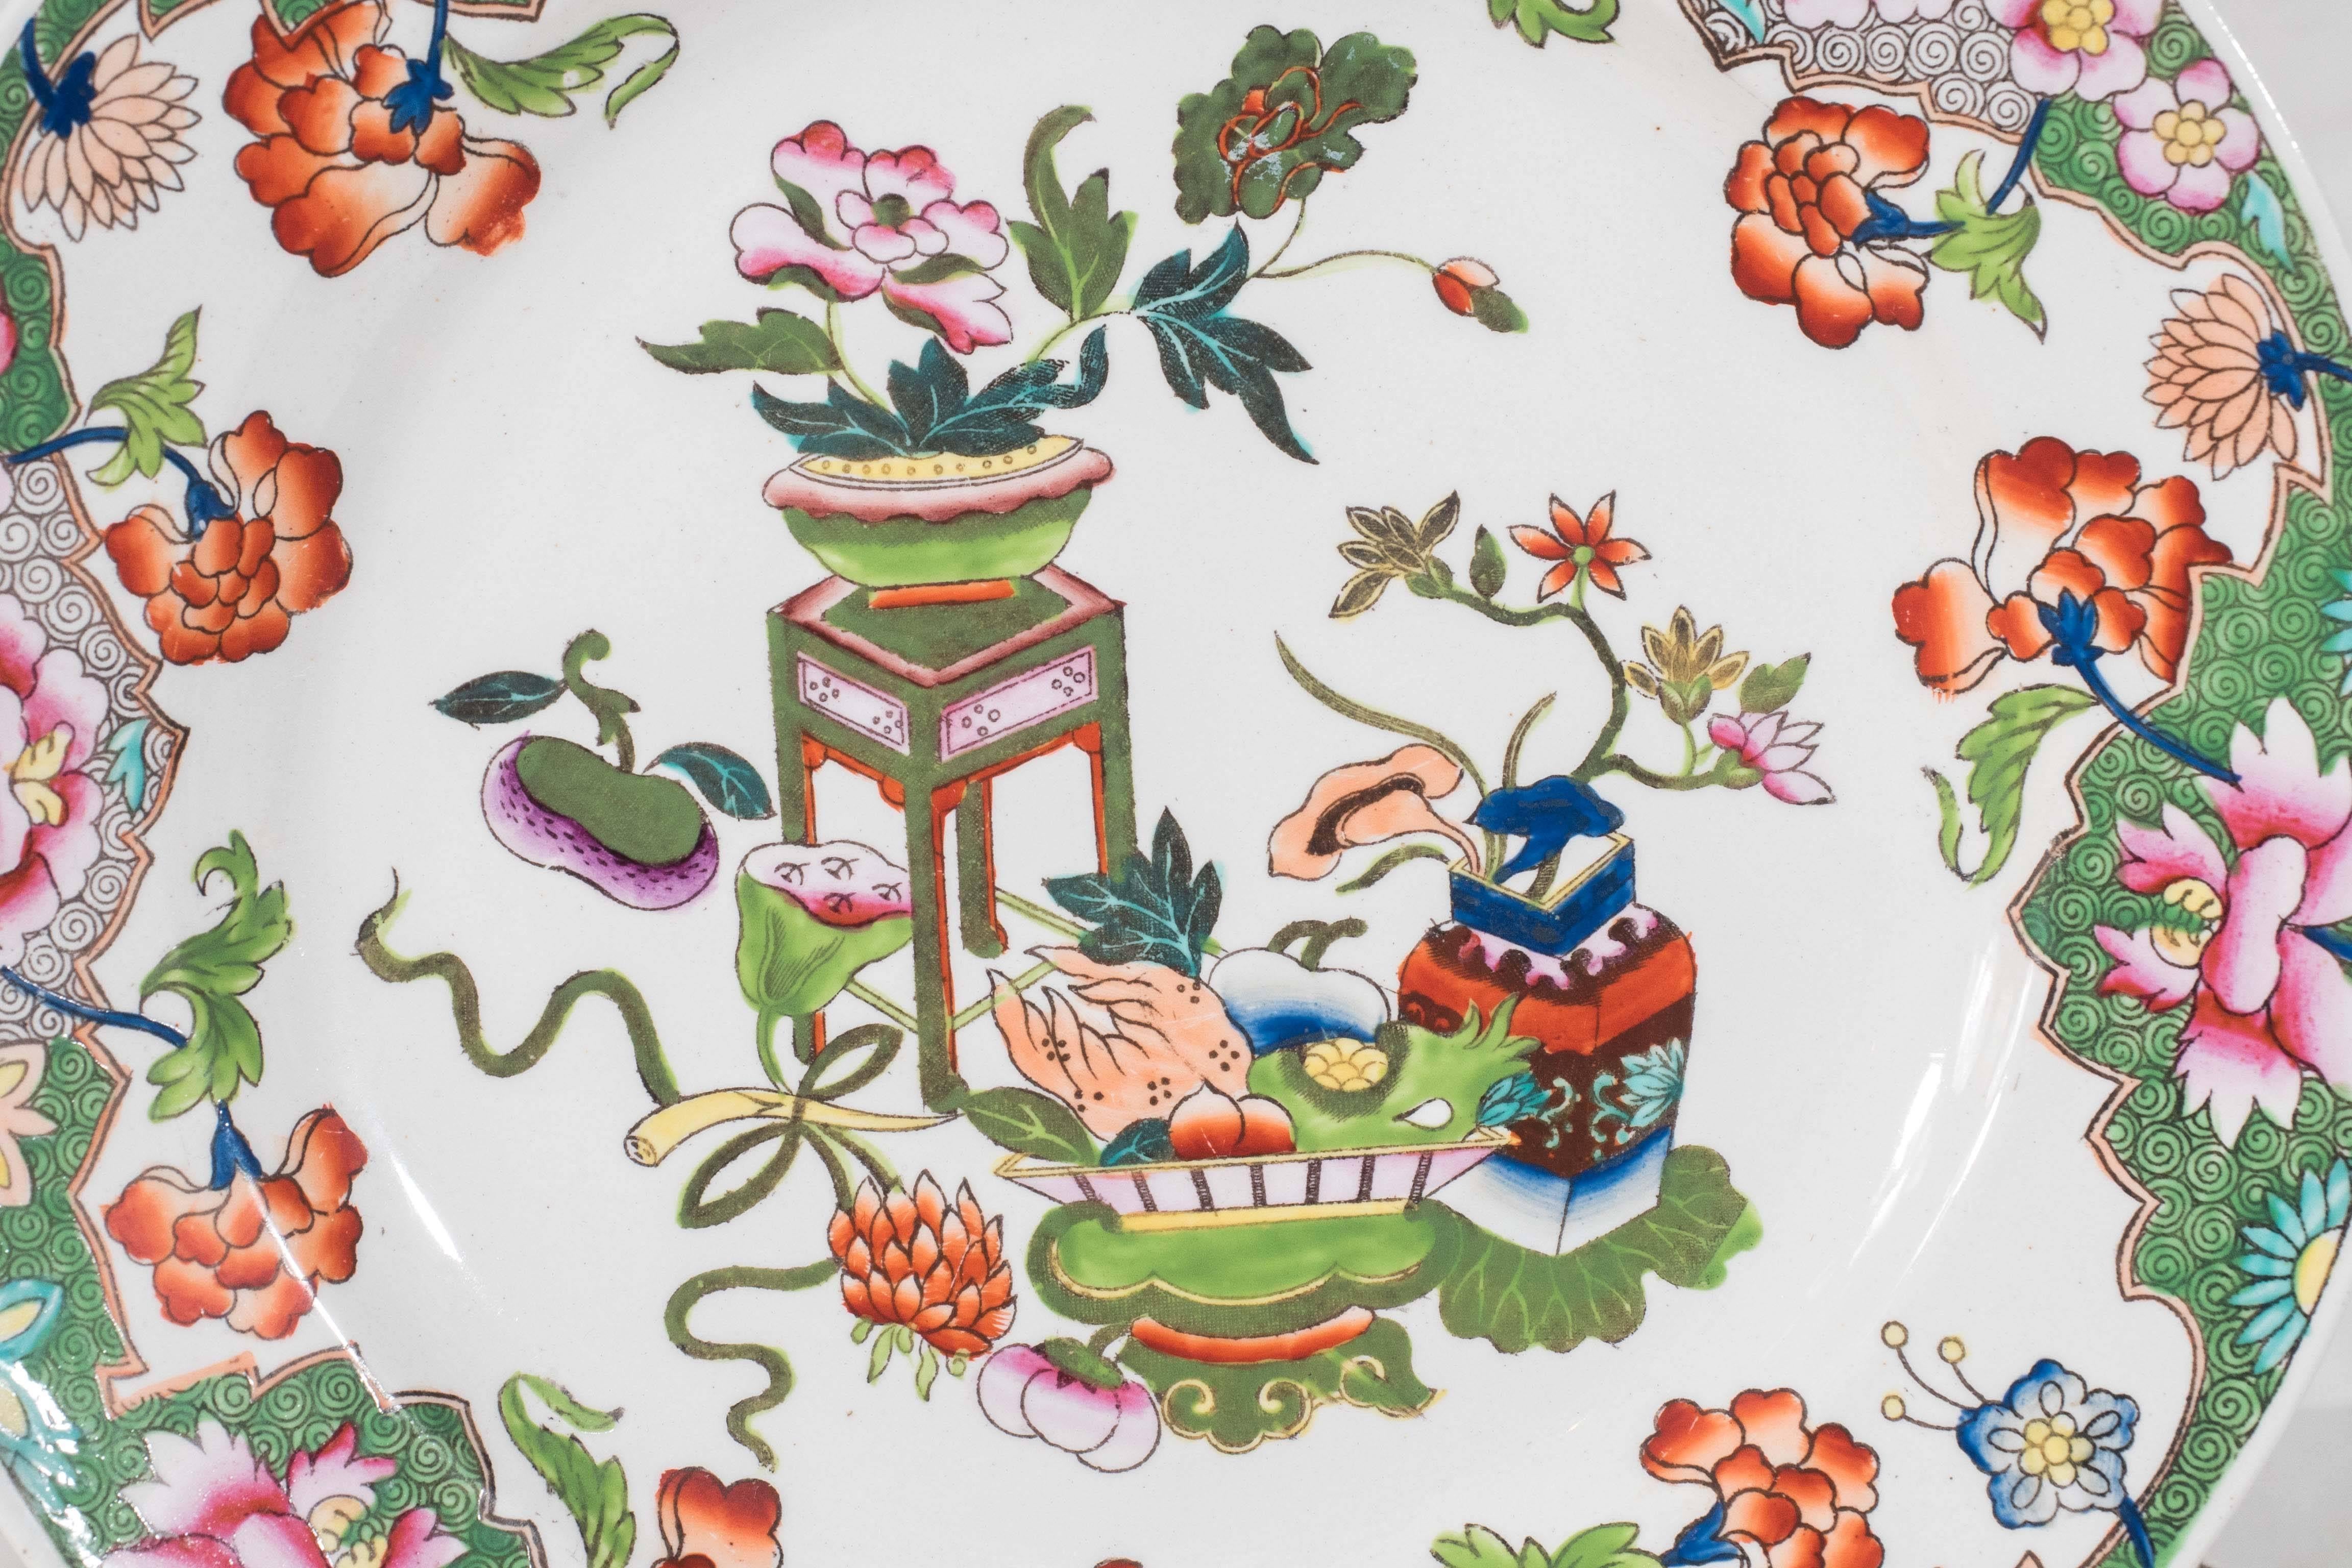 We are pleased to offer this set of brightly colored Spode dessert dishes decorated with the objects of good luck and a floral border. Painted in bright enamels of greens, pinks, orange and yellow on a bright white ground. 
The bright colors against